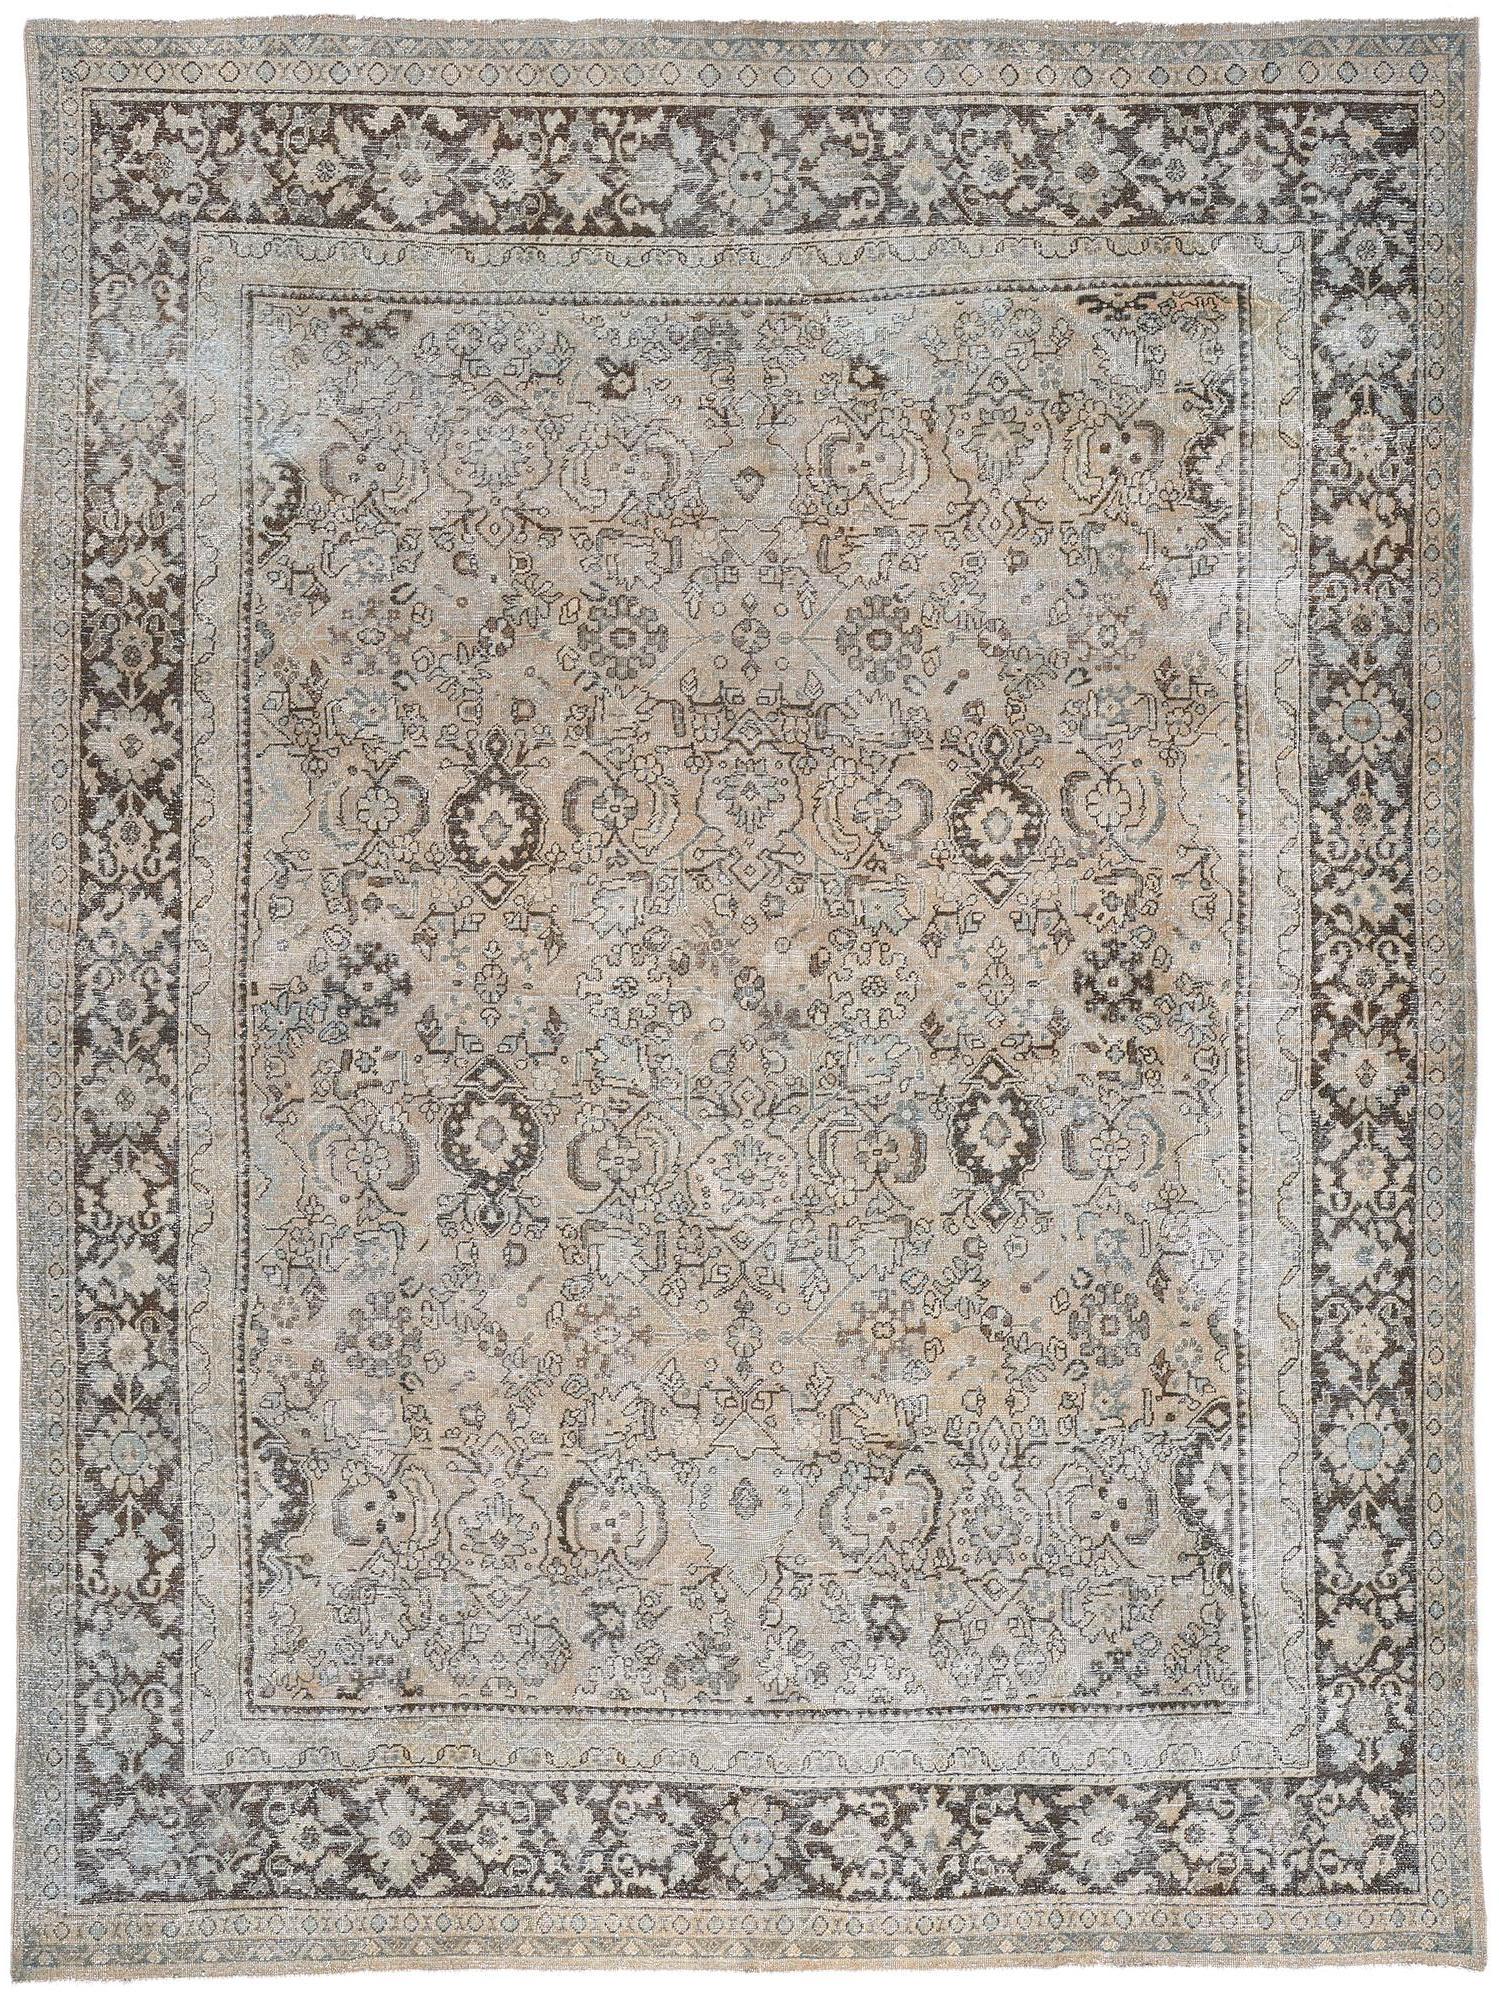 Antique Persian Mahal Rug, Rustic and Refined Meets Laid-Back Luxury